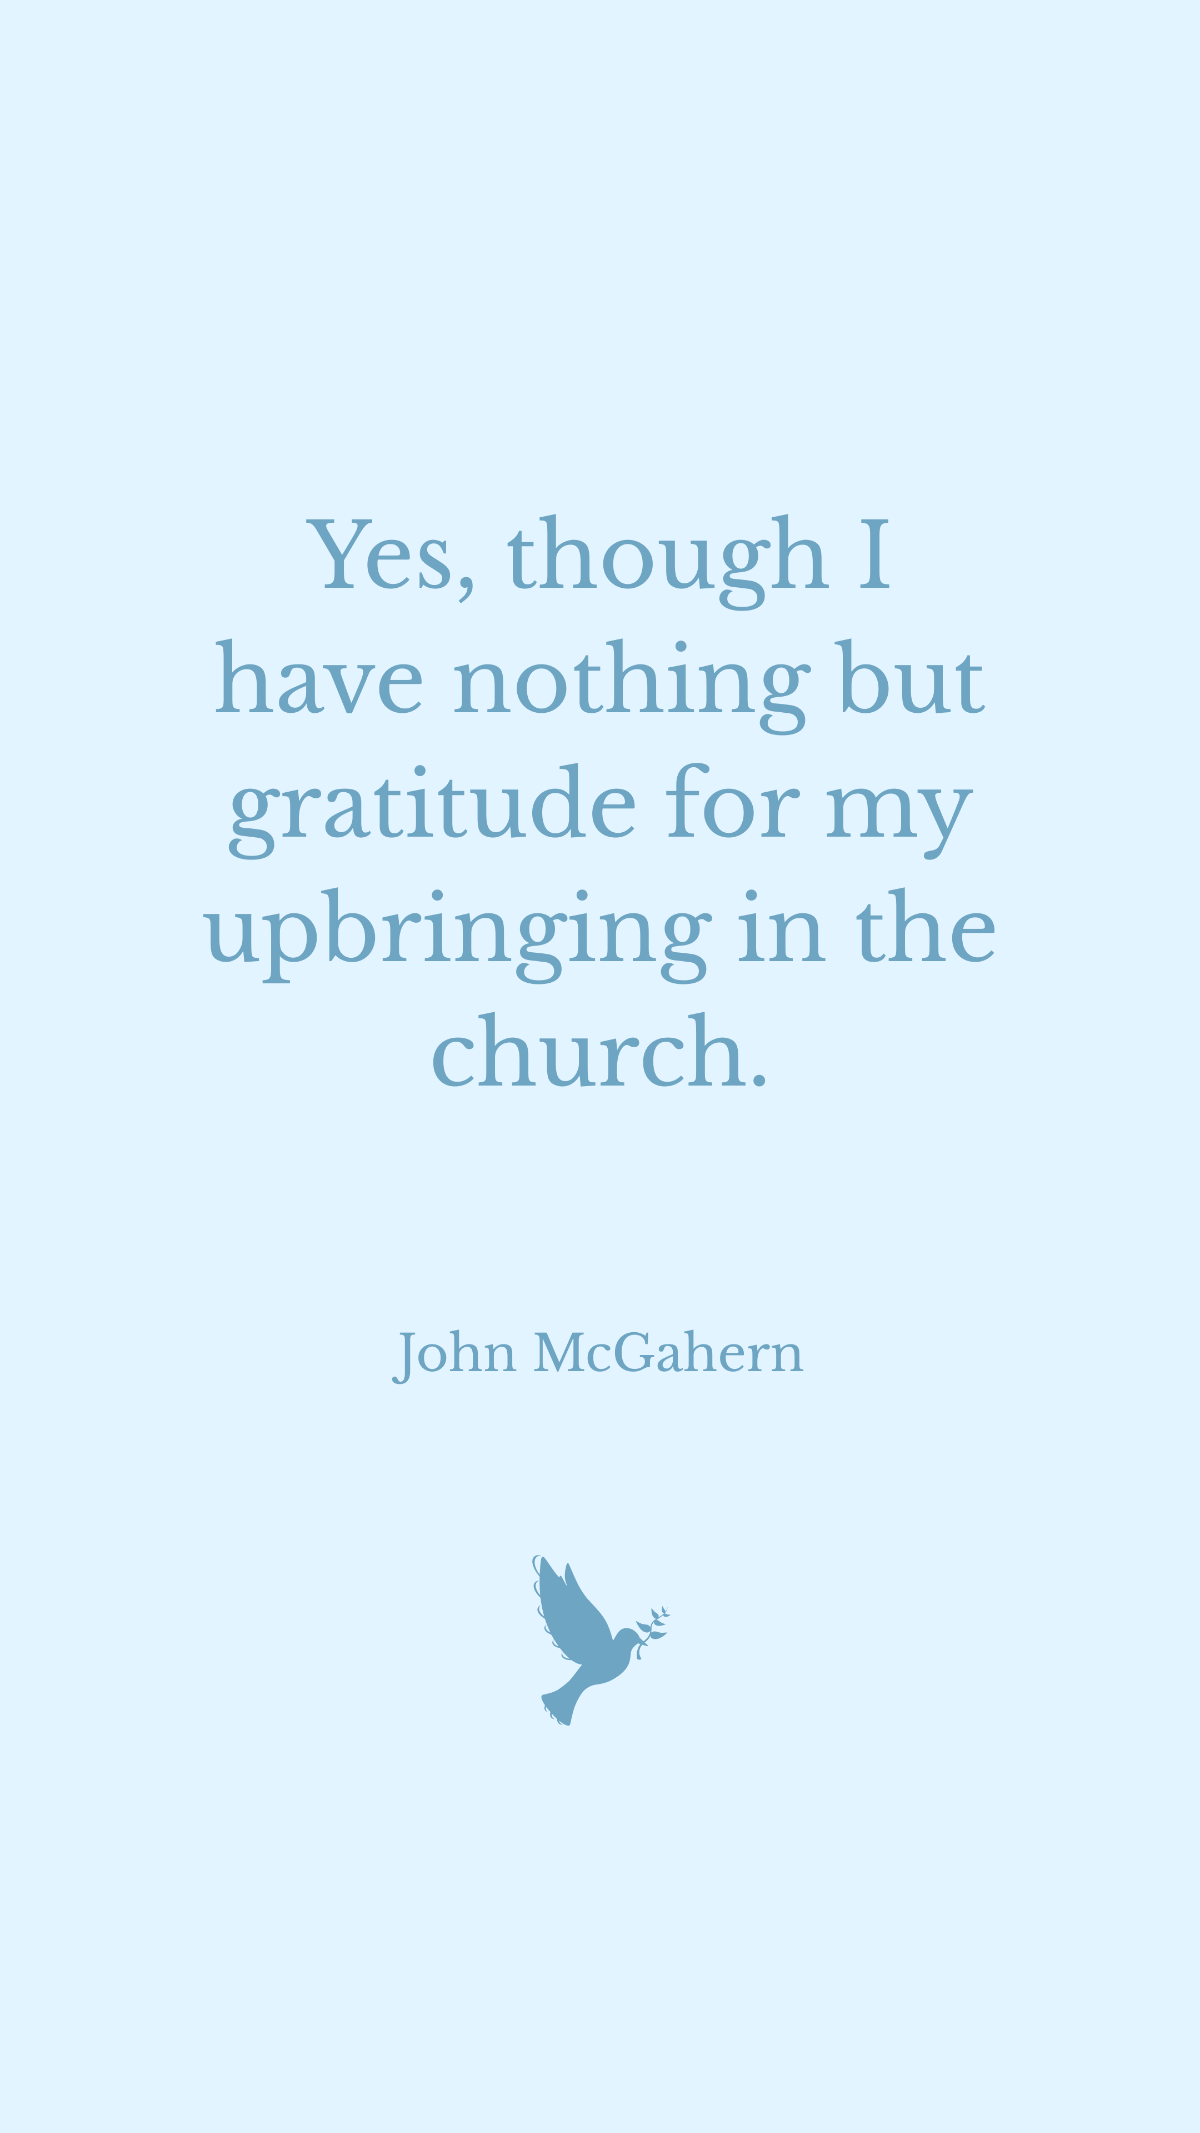 Free John McGahern - Yes, though I have nothing but gratitude for my upbringing in the church. Template